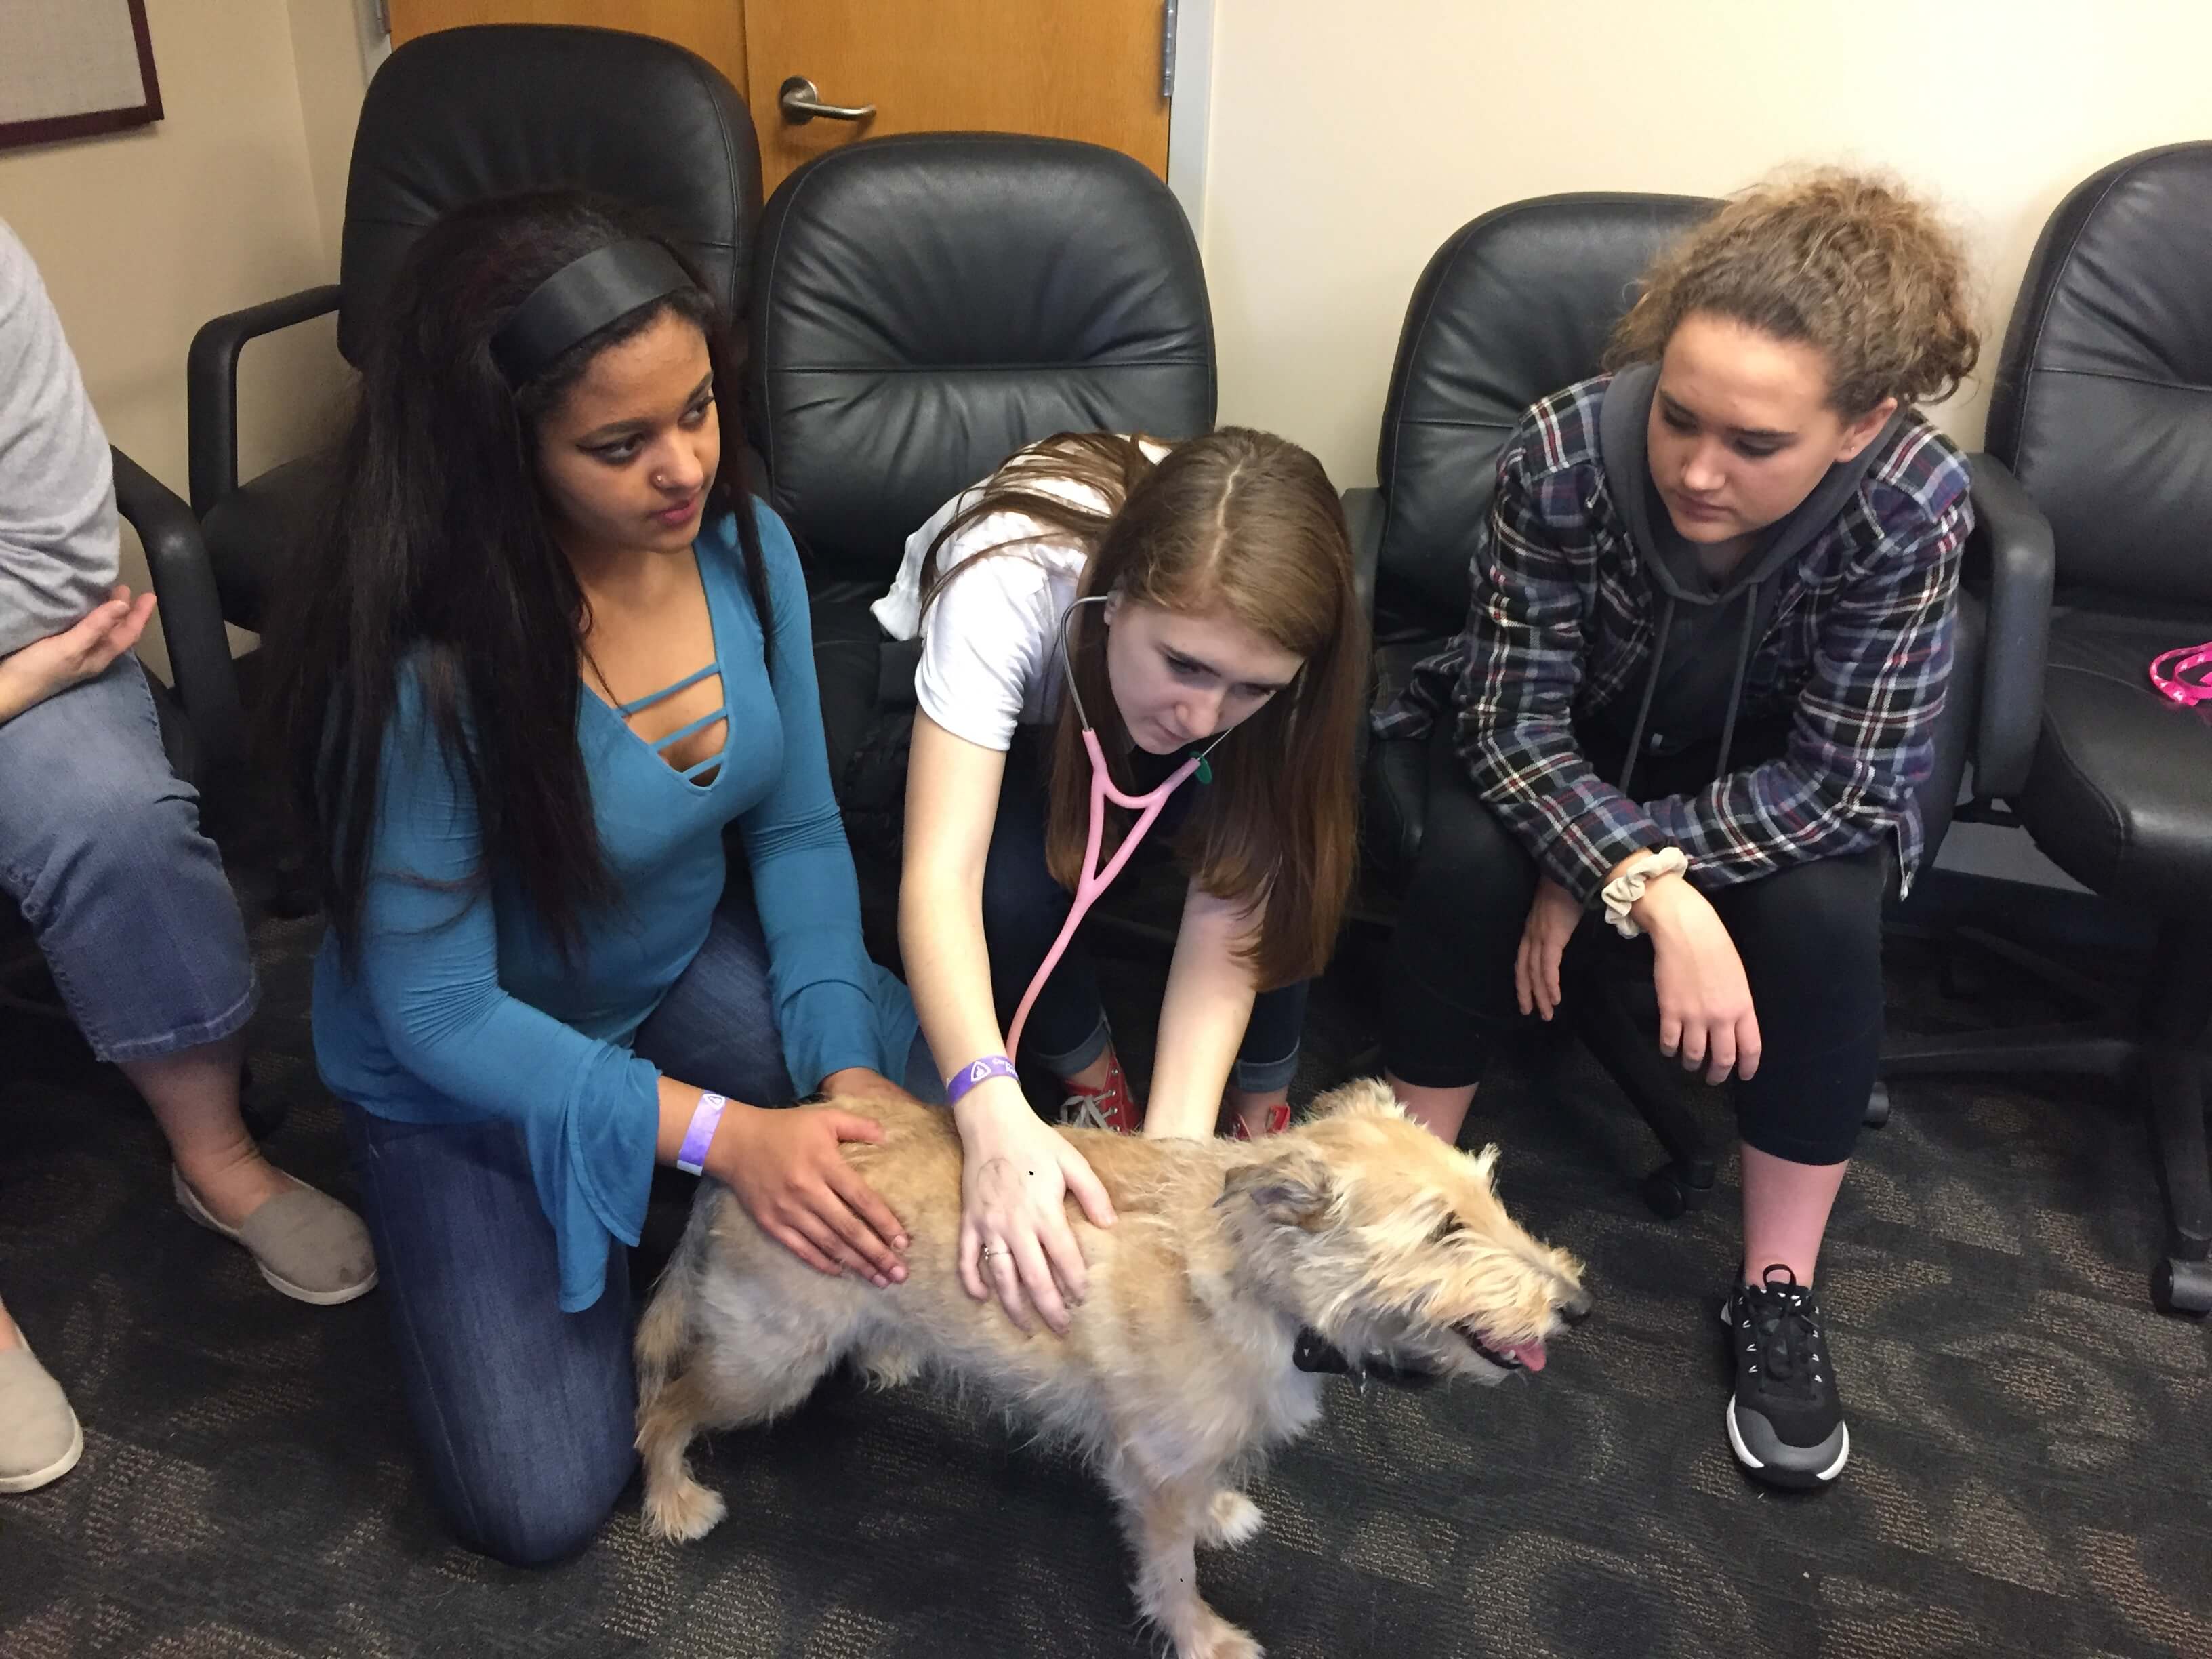 Students performing a physical examination on a dog